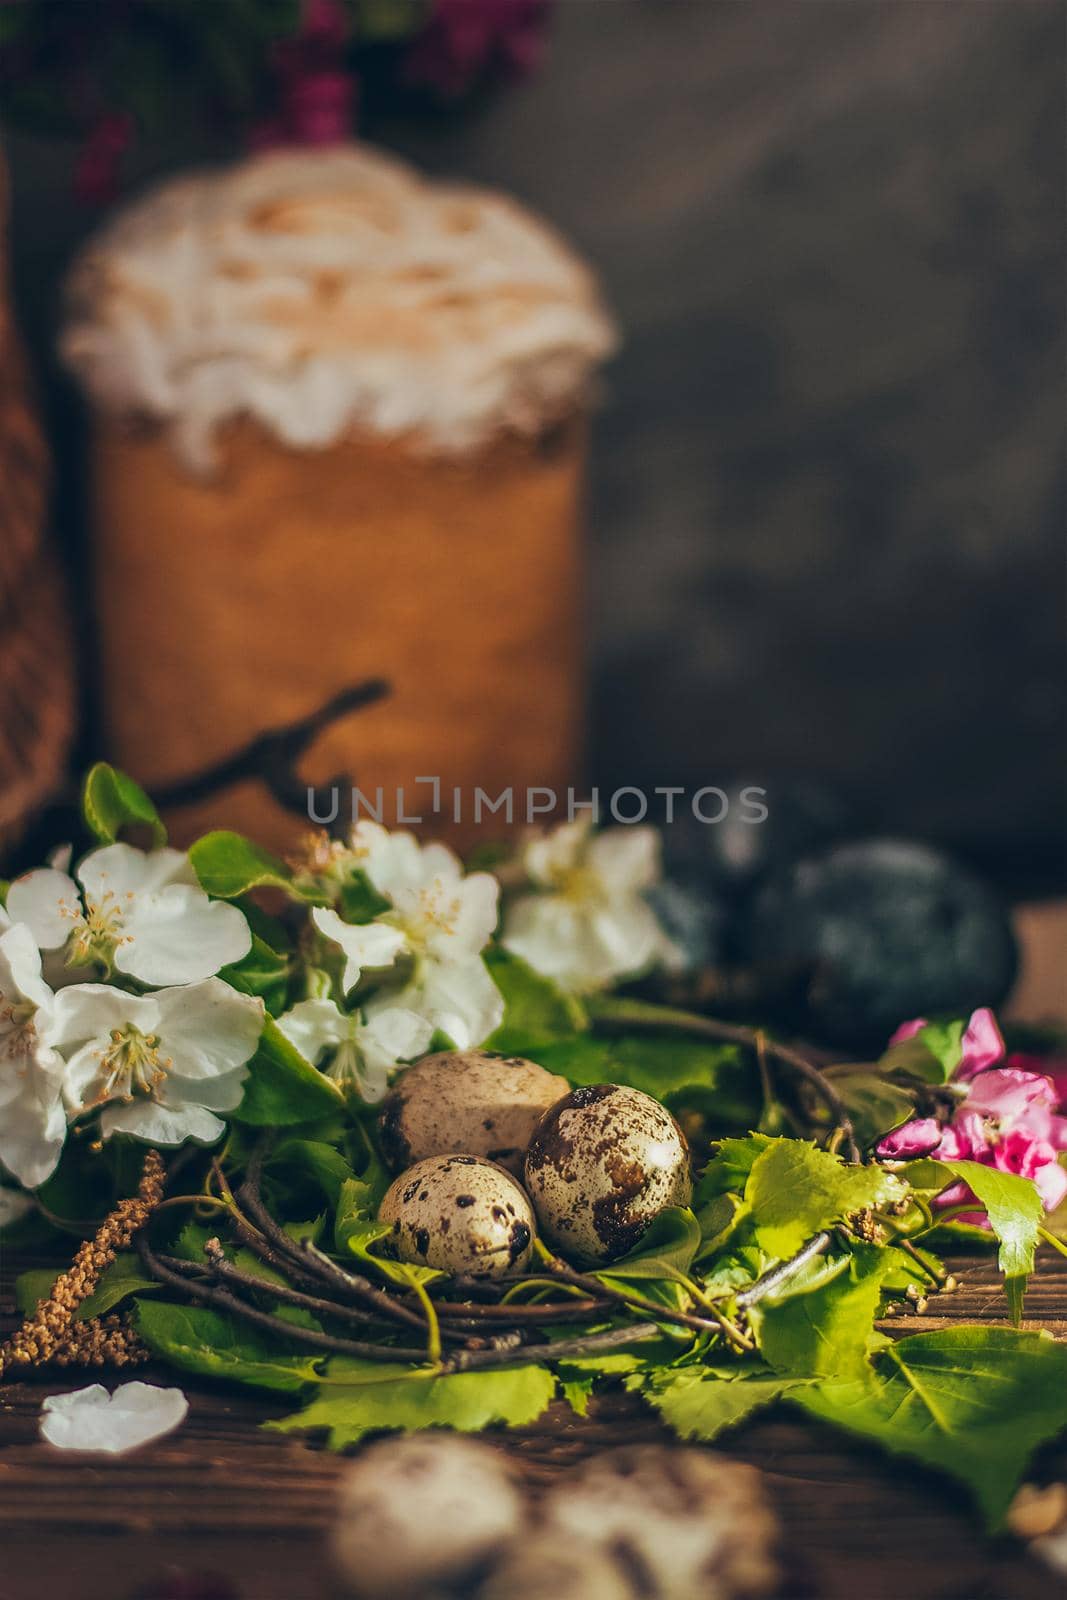 Easter eggs in the nest on rustic wooden background with apple blossom branch